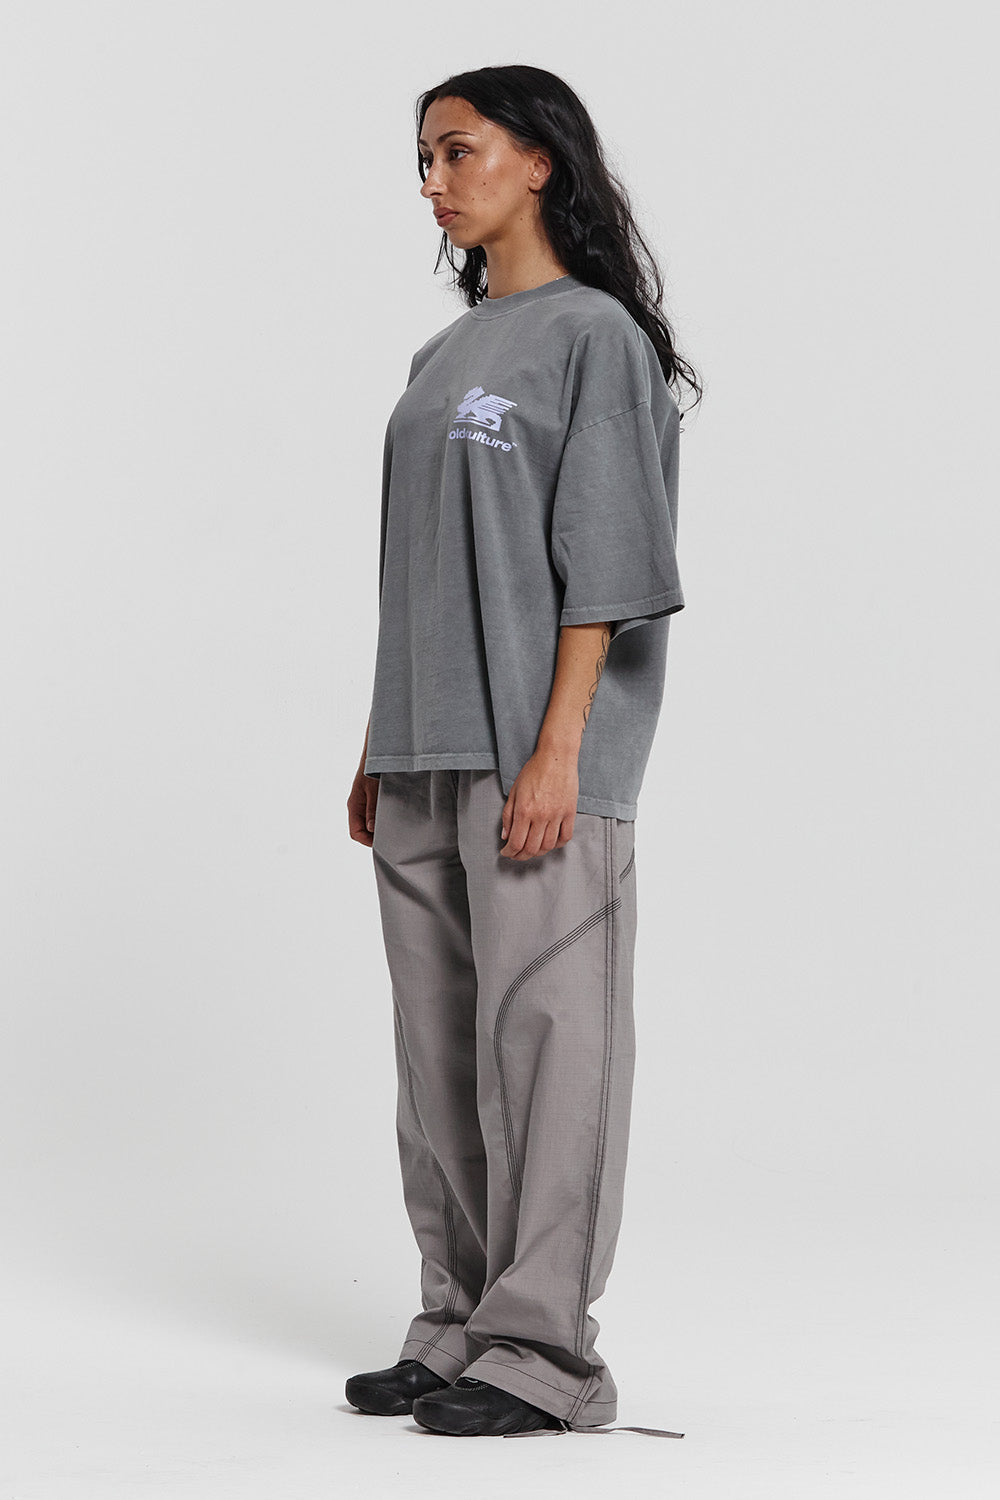 BAGGY RIPSTOP PANTS FADED GRAY